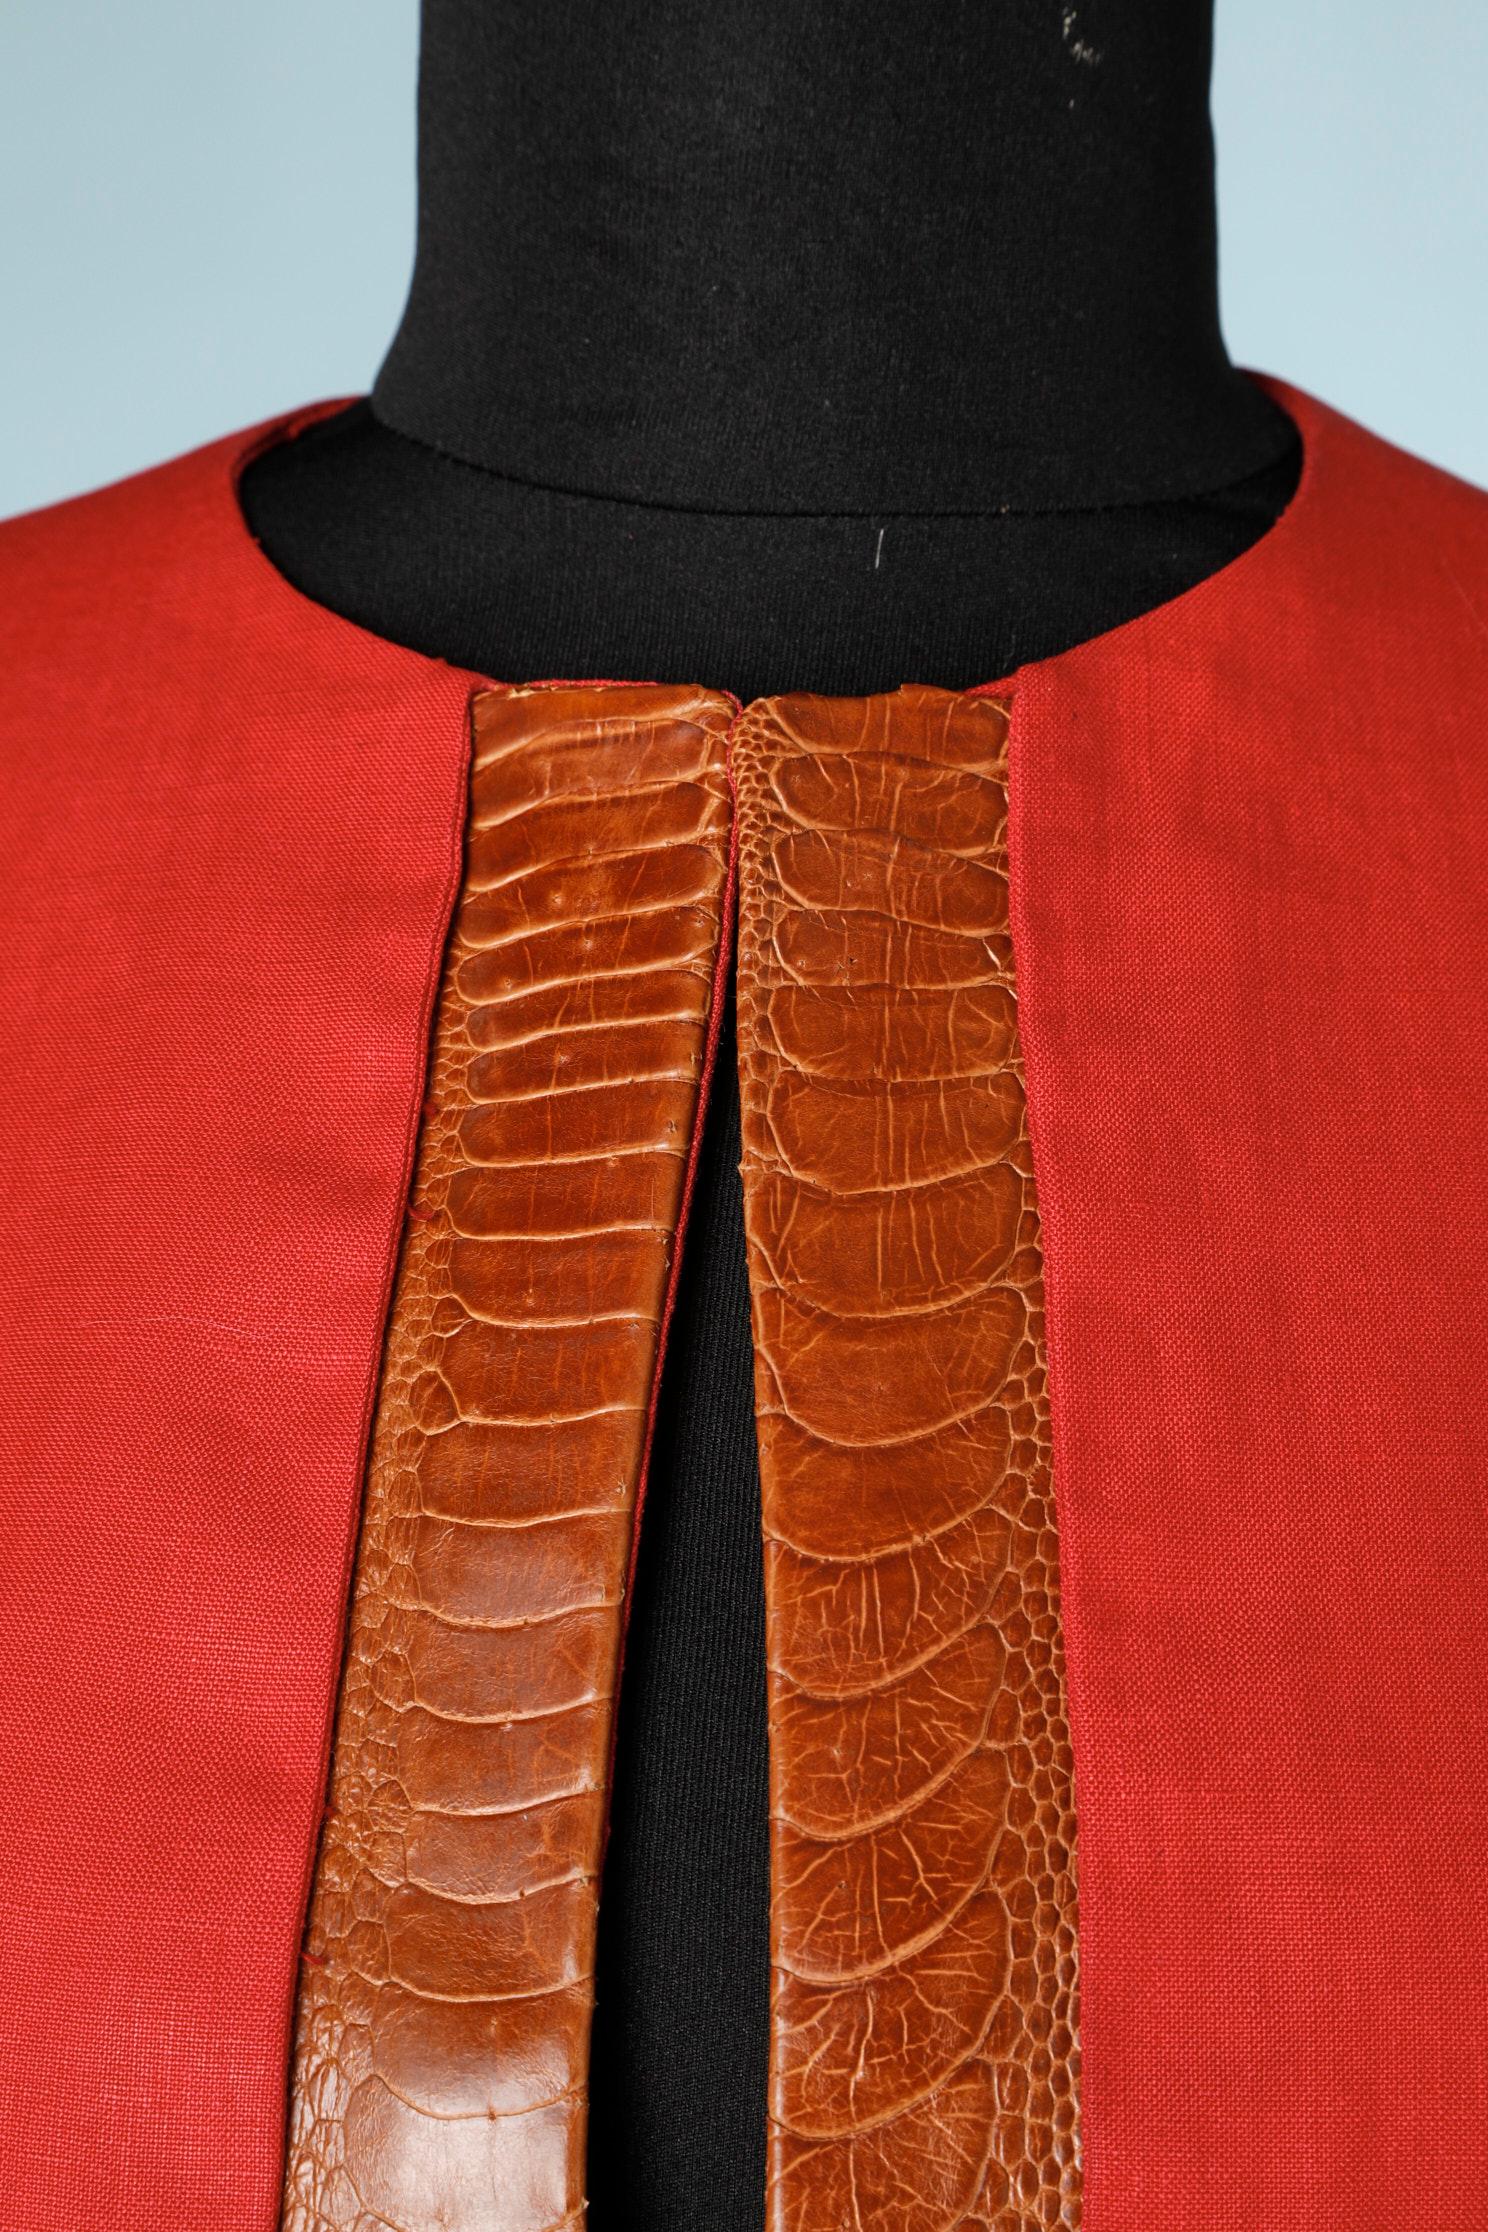 Jacket: edge-to-edge red linen jacket with a crocodile skin part on the facing. No button, no lining.
Slight traces of perspiration under the right armpit and slight spot on the right shoulder.

Lecoanet Hemant Couture's House has been created in